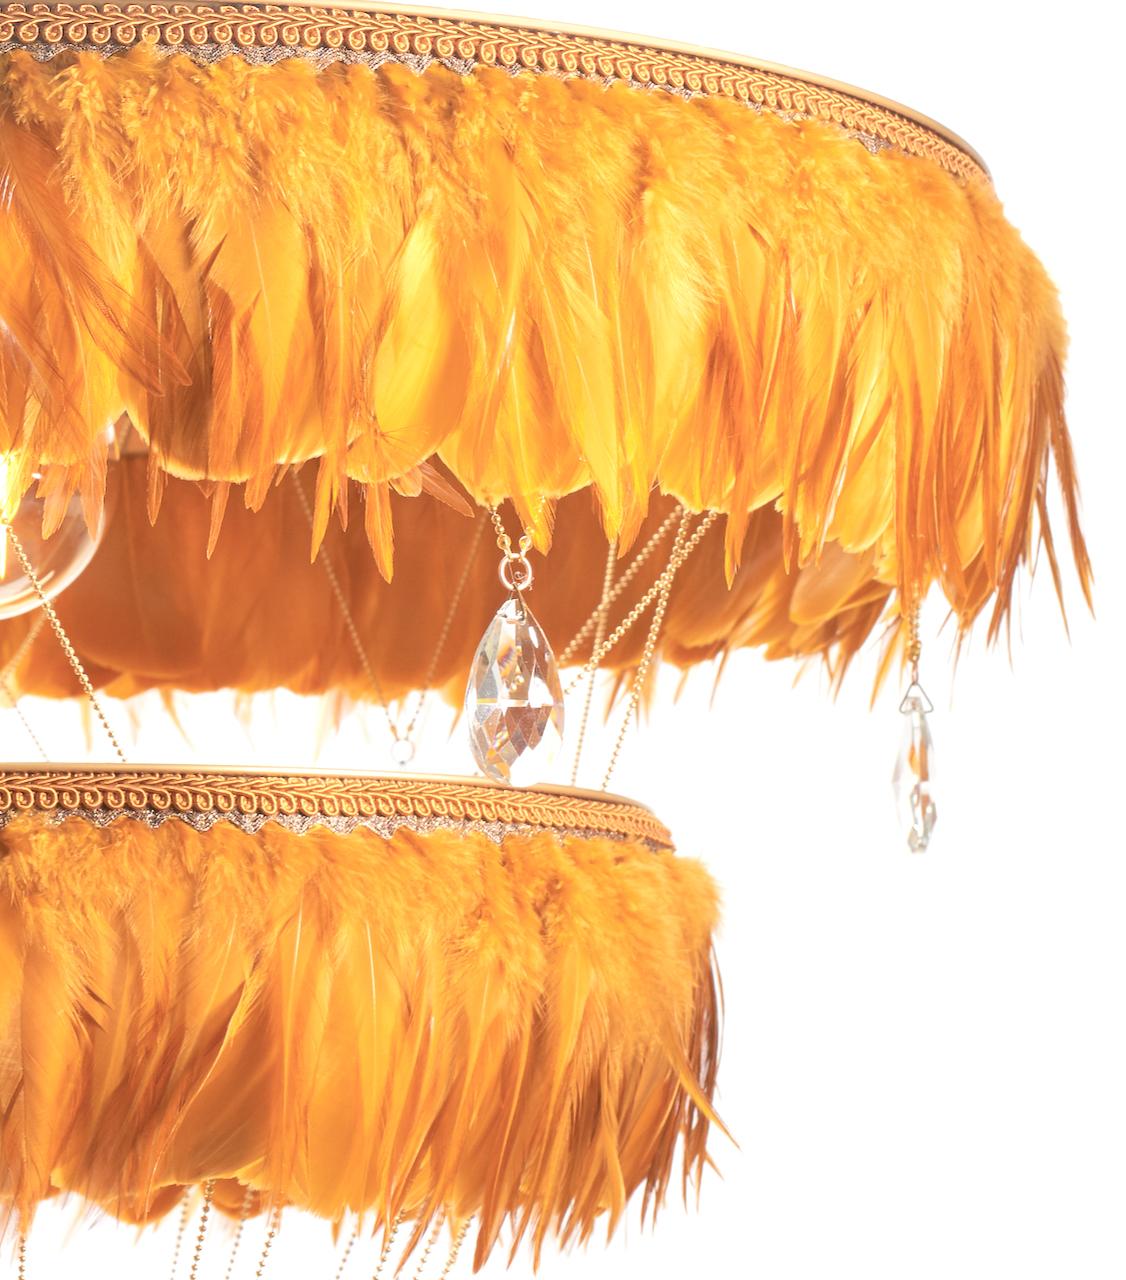 British Feather Chandelier in Mustard Yellow - Bertie -  Hand Made to order in London.  For Sale